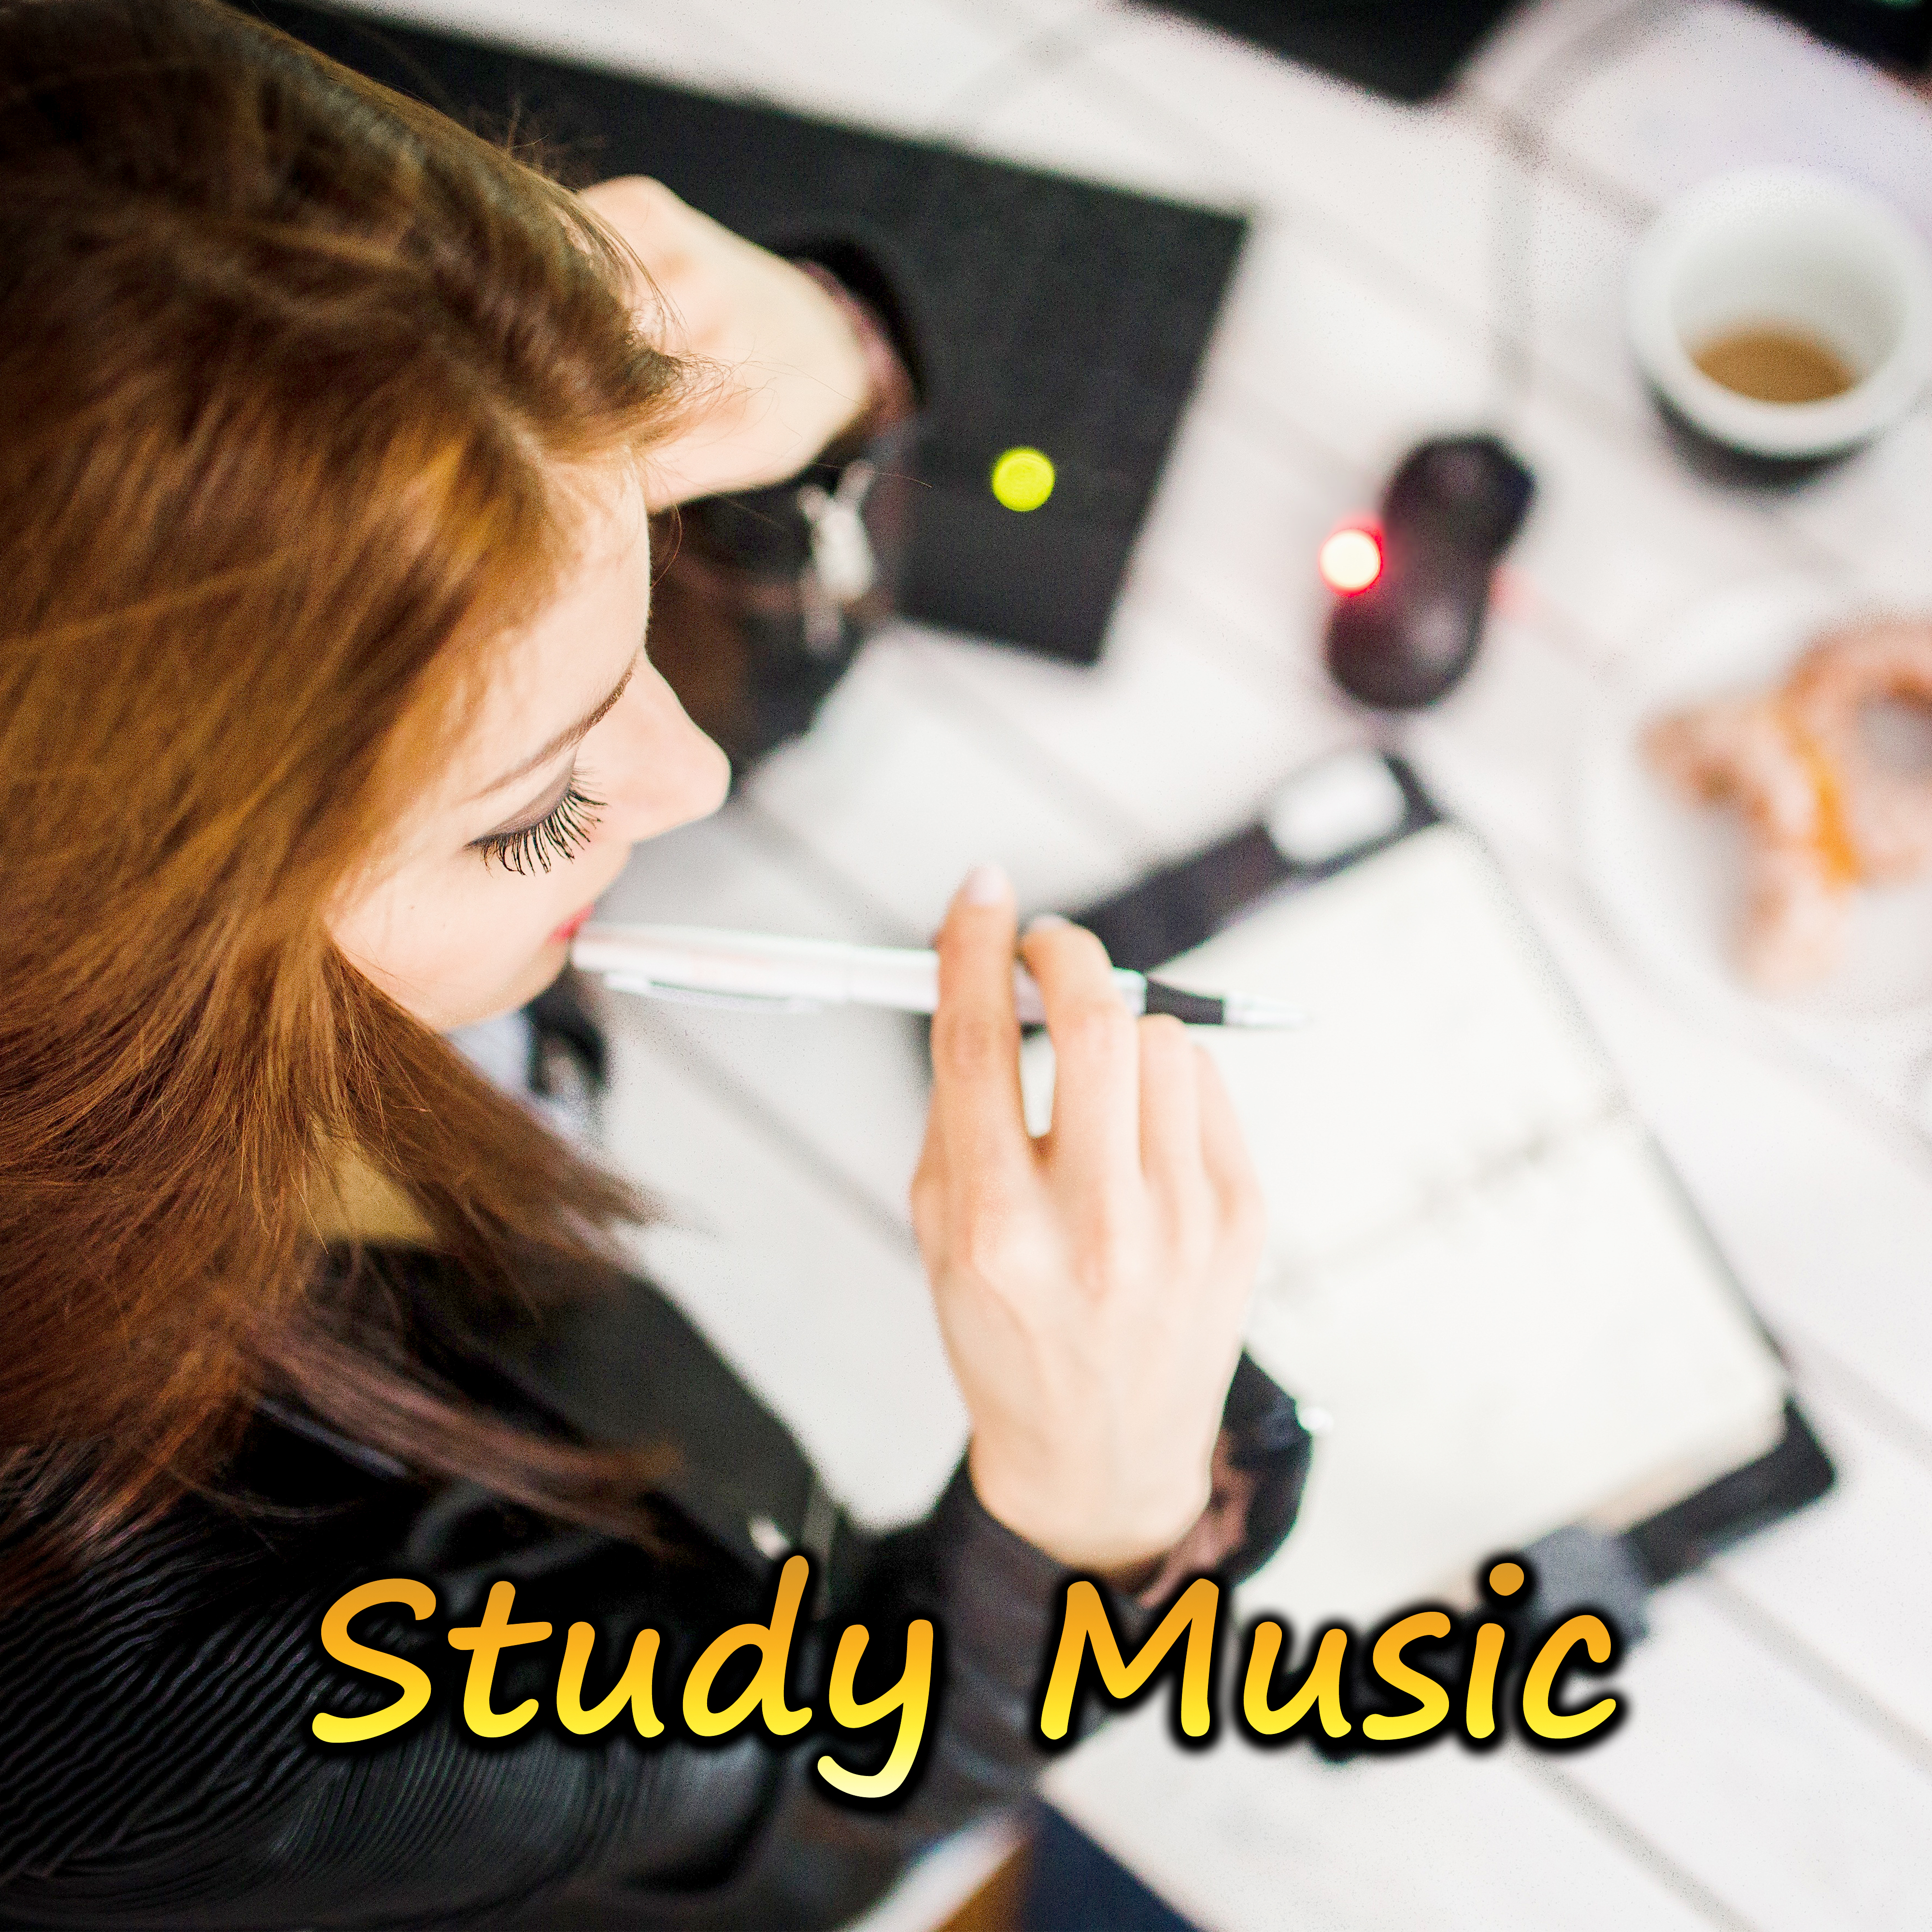 Study Music  New Age Music to Help You Focus and Concentrate, Study Songs, Nature Sounds for Development